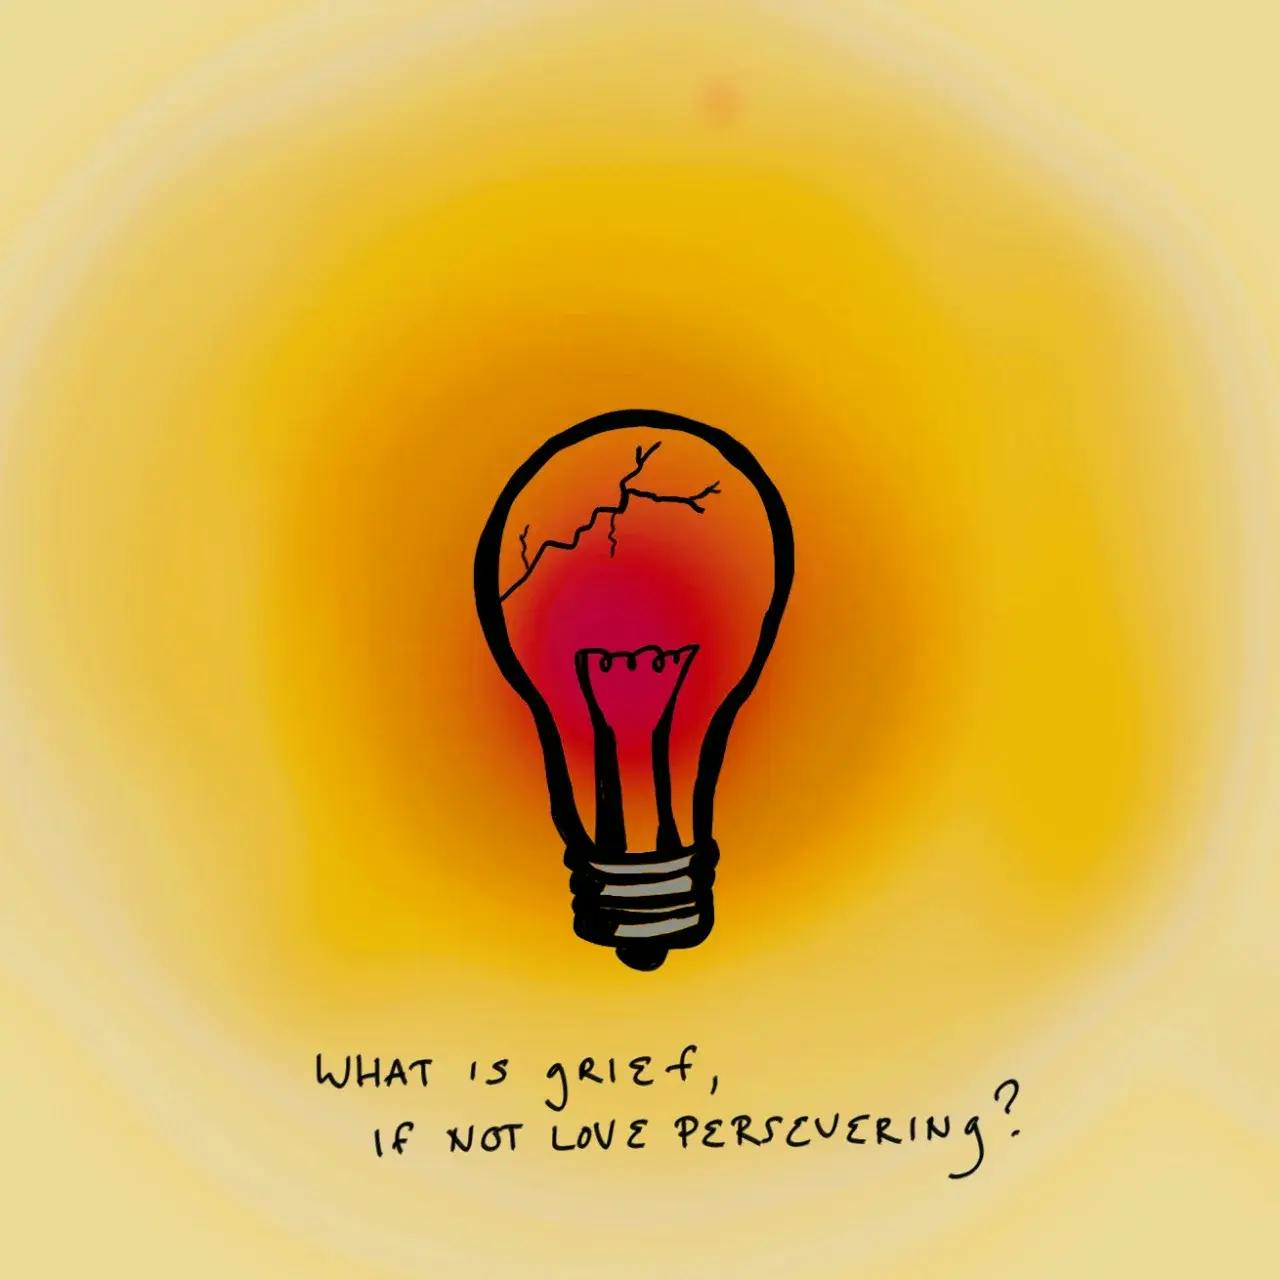 'What is grief, if not love persevering?' quote's illustration.